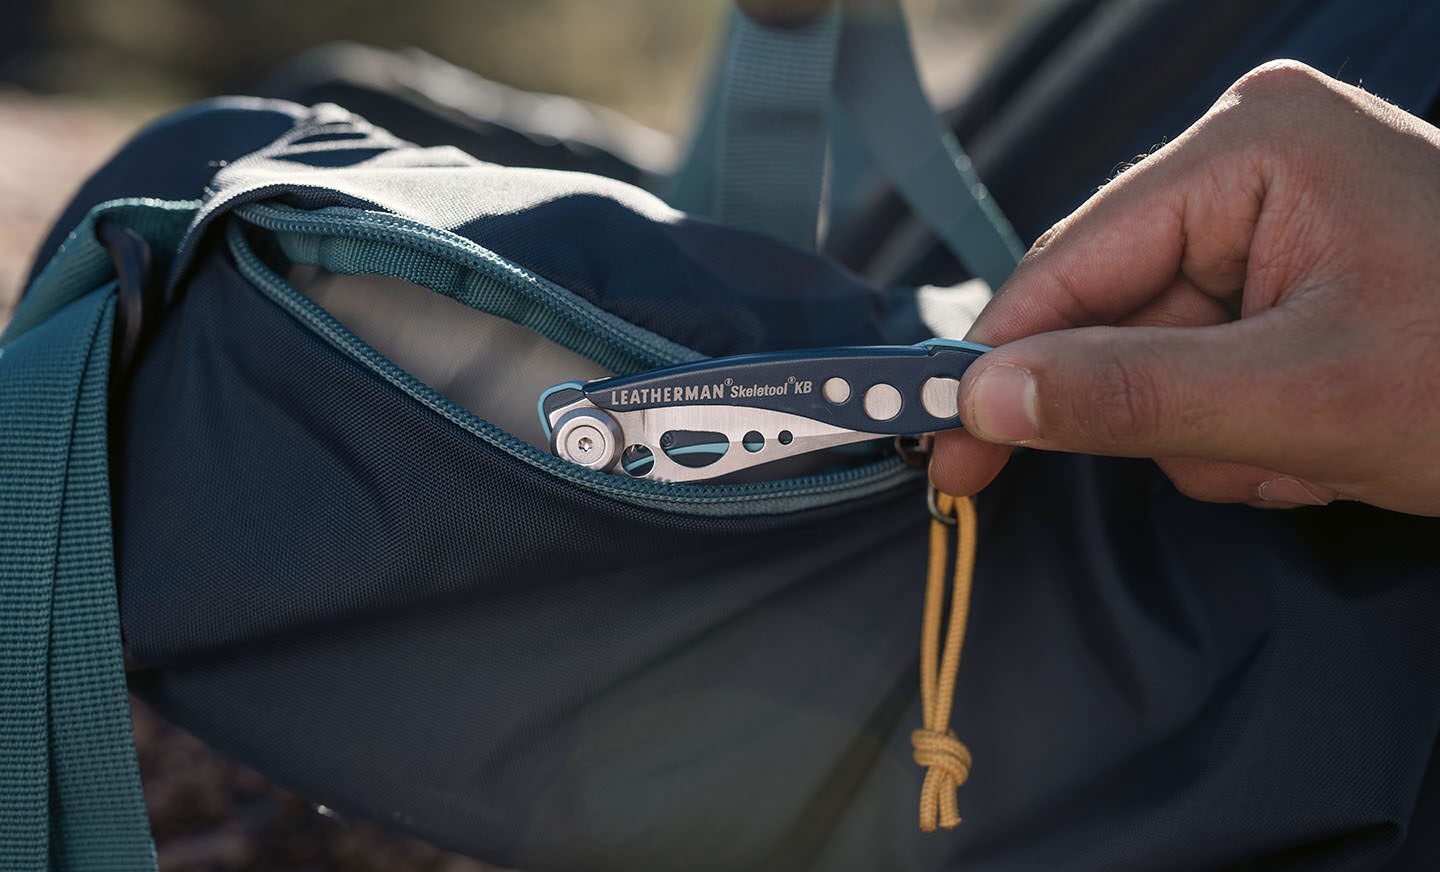 Nightshade Leatherman KB coming out of hiking pack